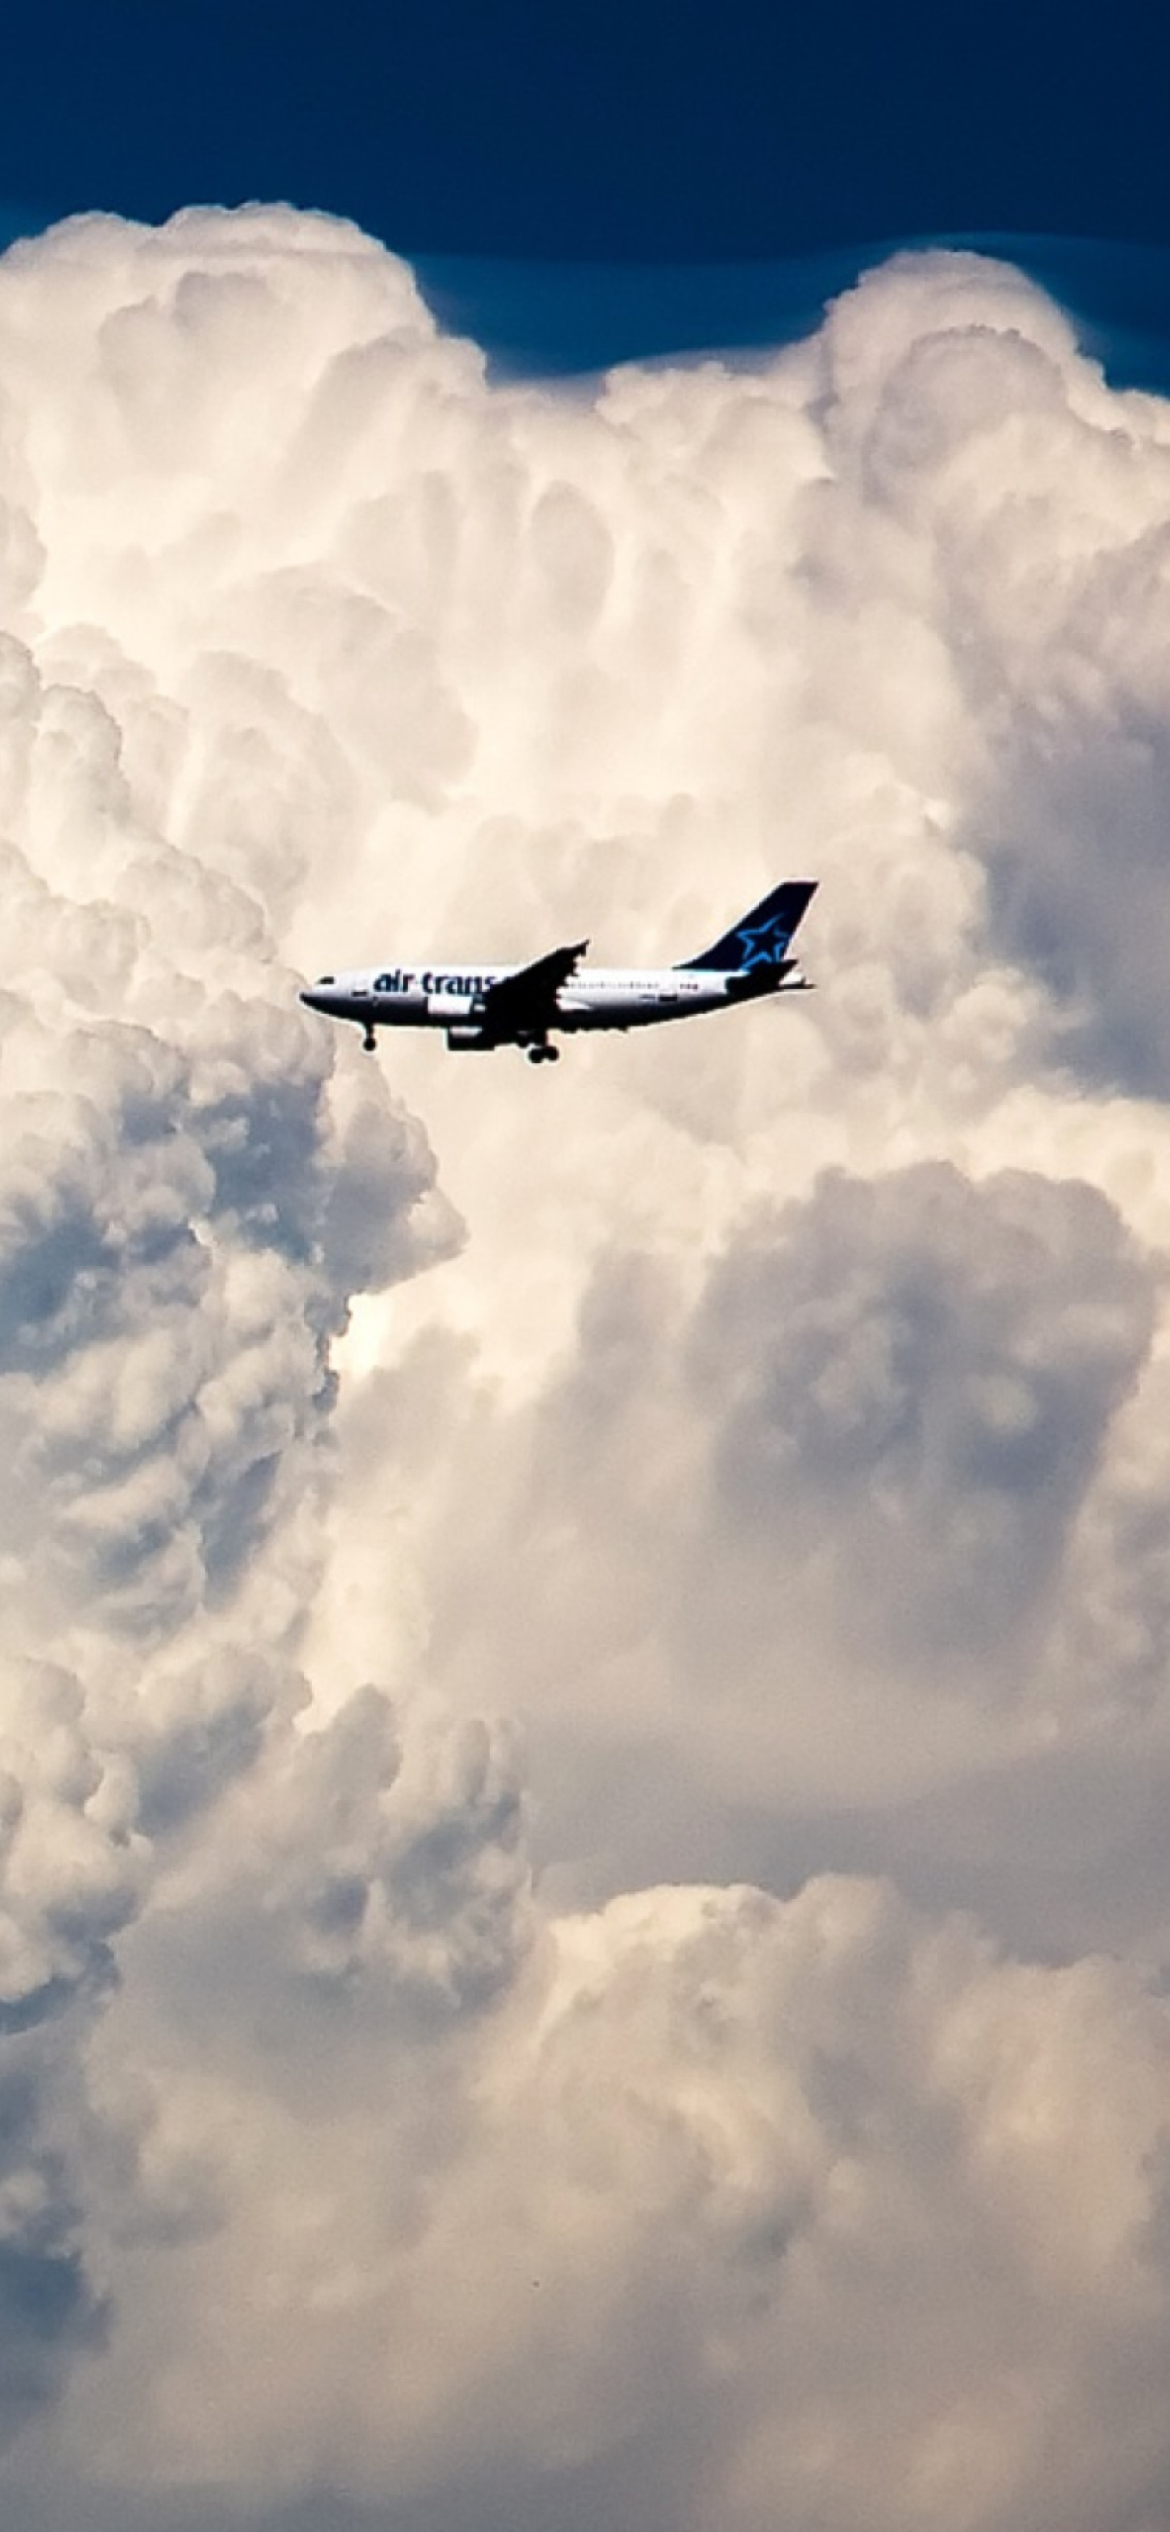 Plane In The Clouds wallpaper 1170x2532